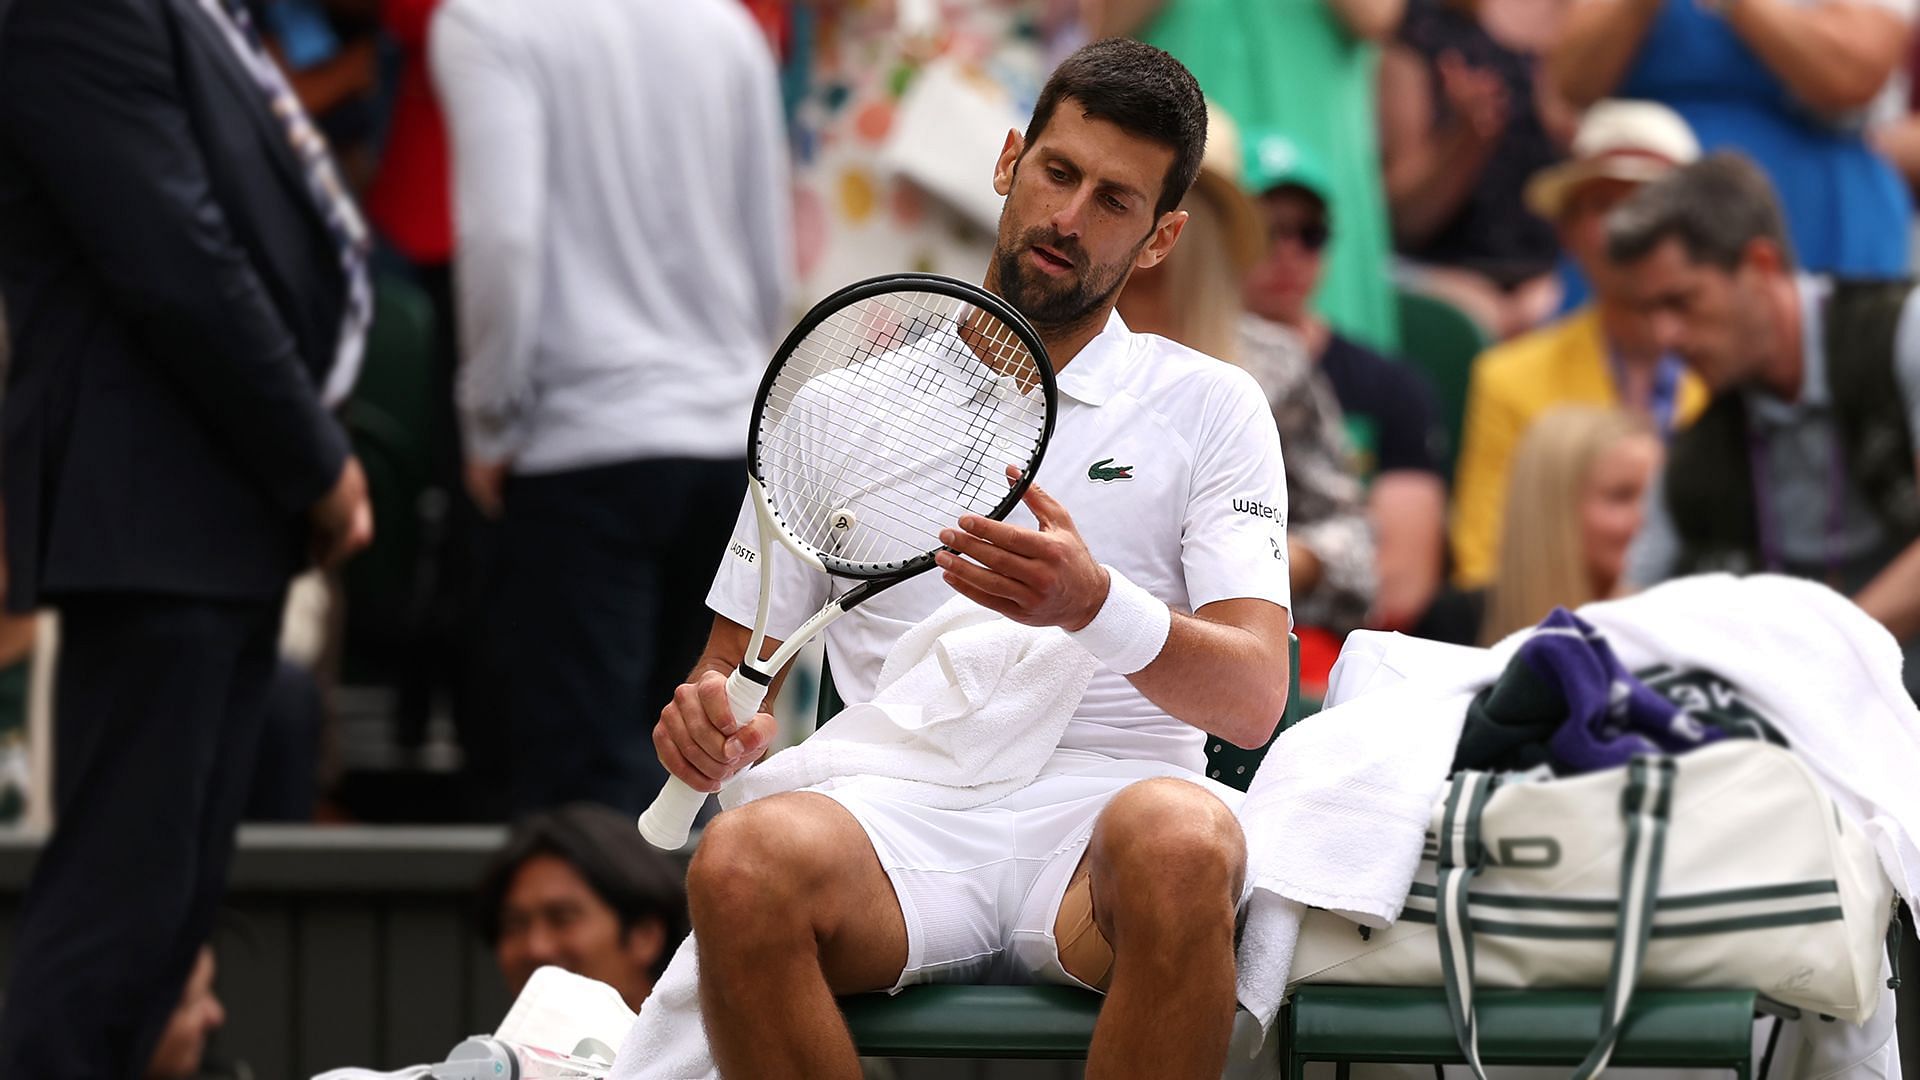 WATCH: Novak Djokovic arrives at Wimbledon barely 3 weeks after knee surgery; takes the practice court despite uncertainty over participation